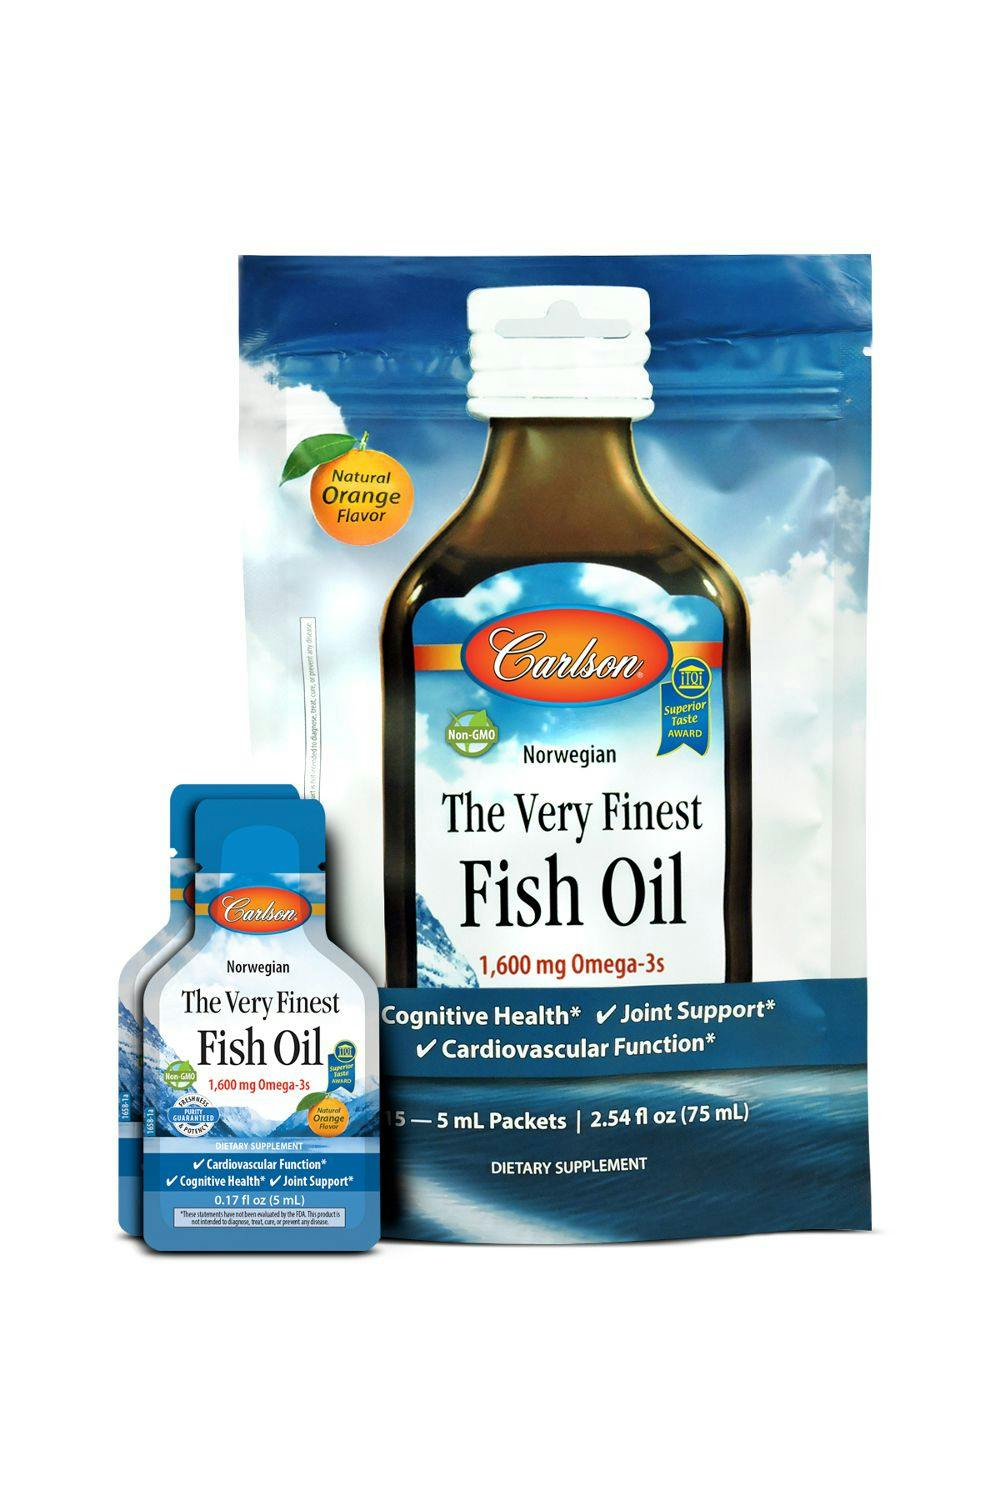 Carlson launches omega-3 single-serving packets at Natural Products Expo West